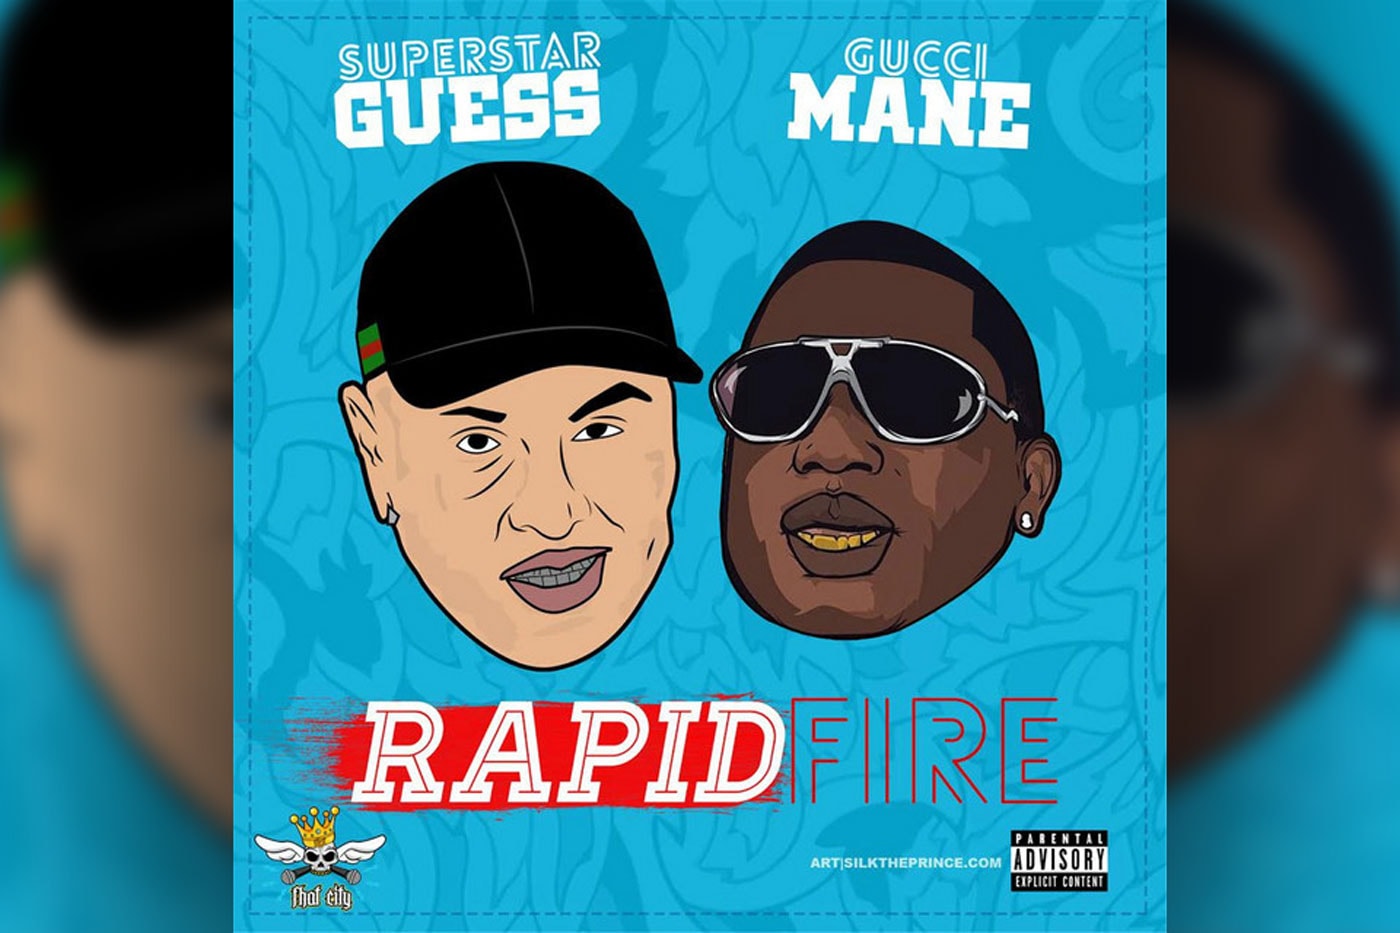 Gucci Mane Jumps on New Song With Superstar Guess "Rapid Fire"